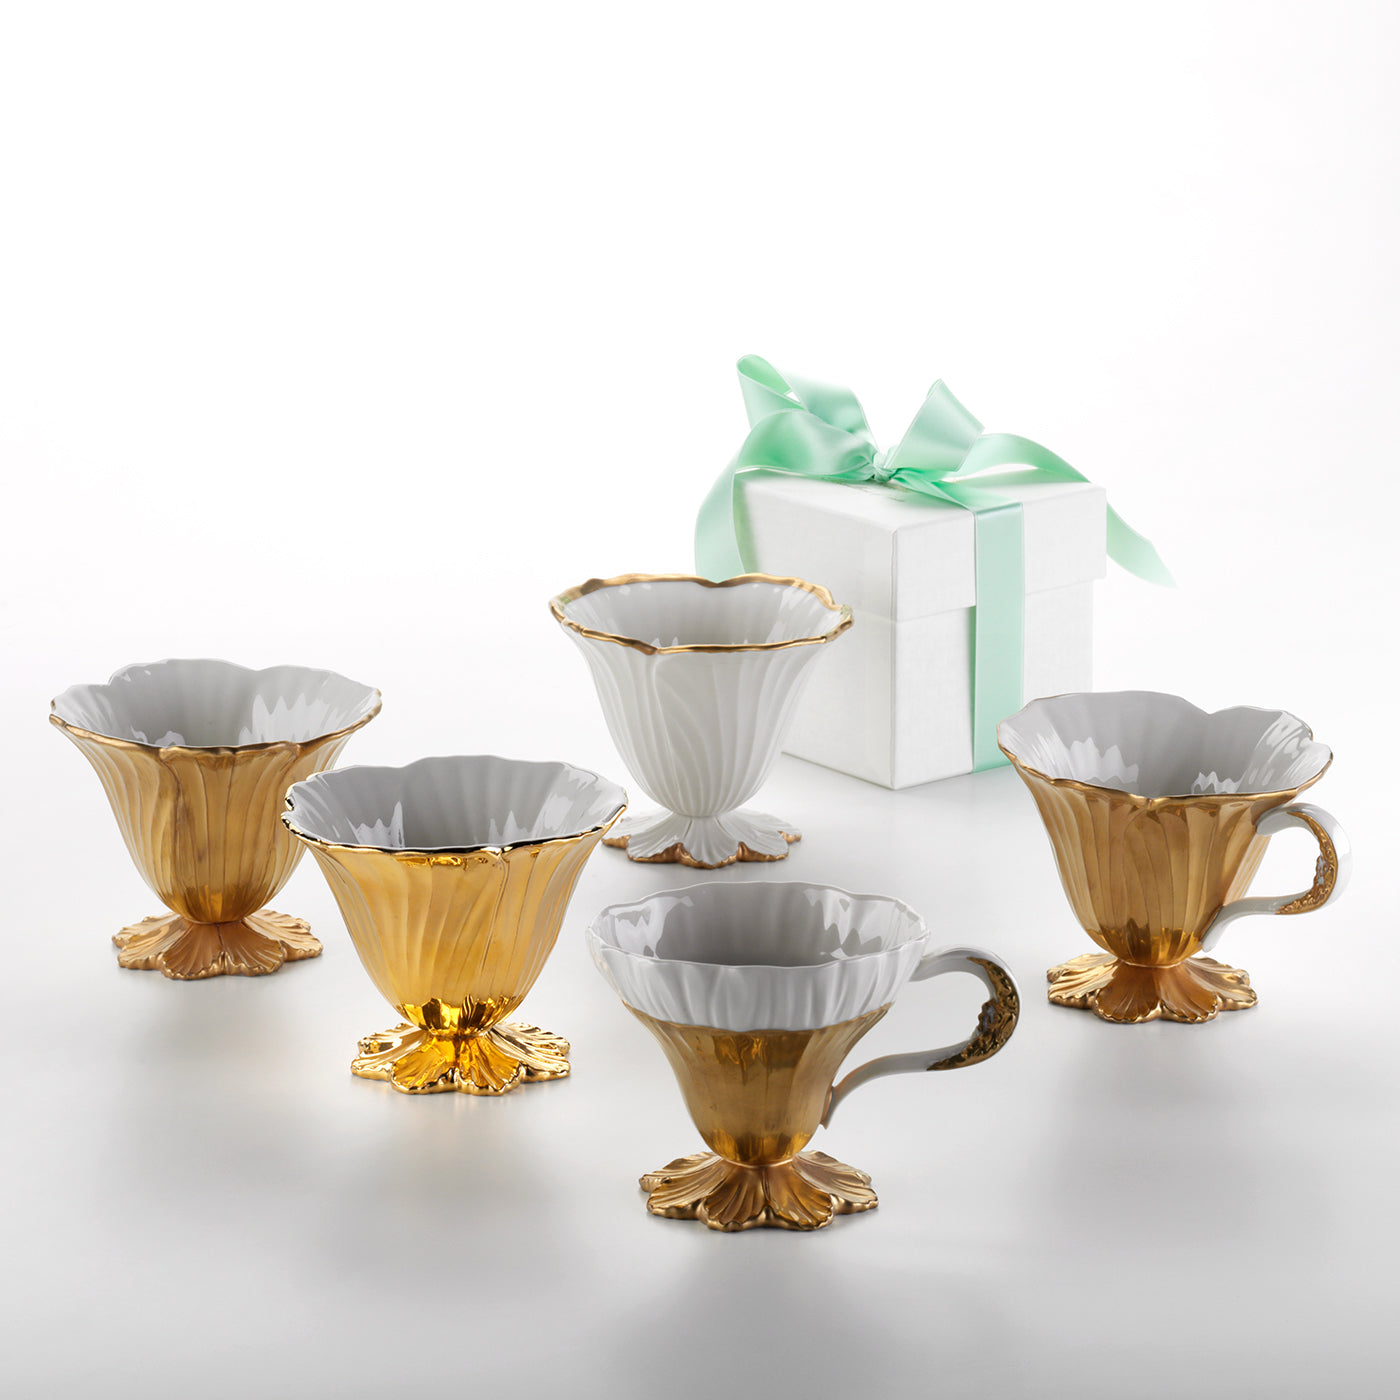 Gold & White Flower Cup - Alternative view 1